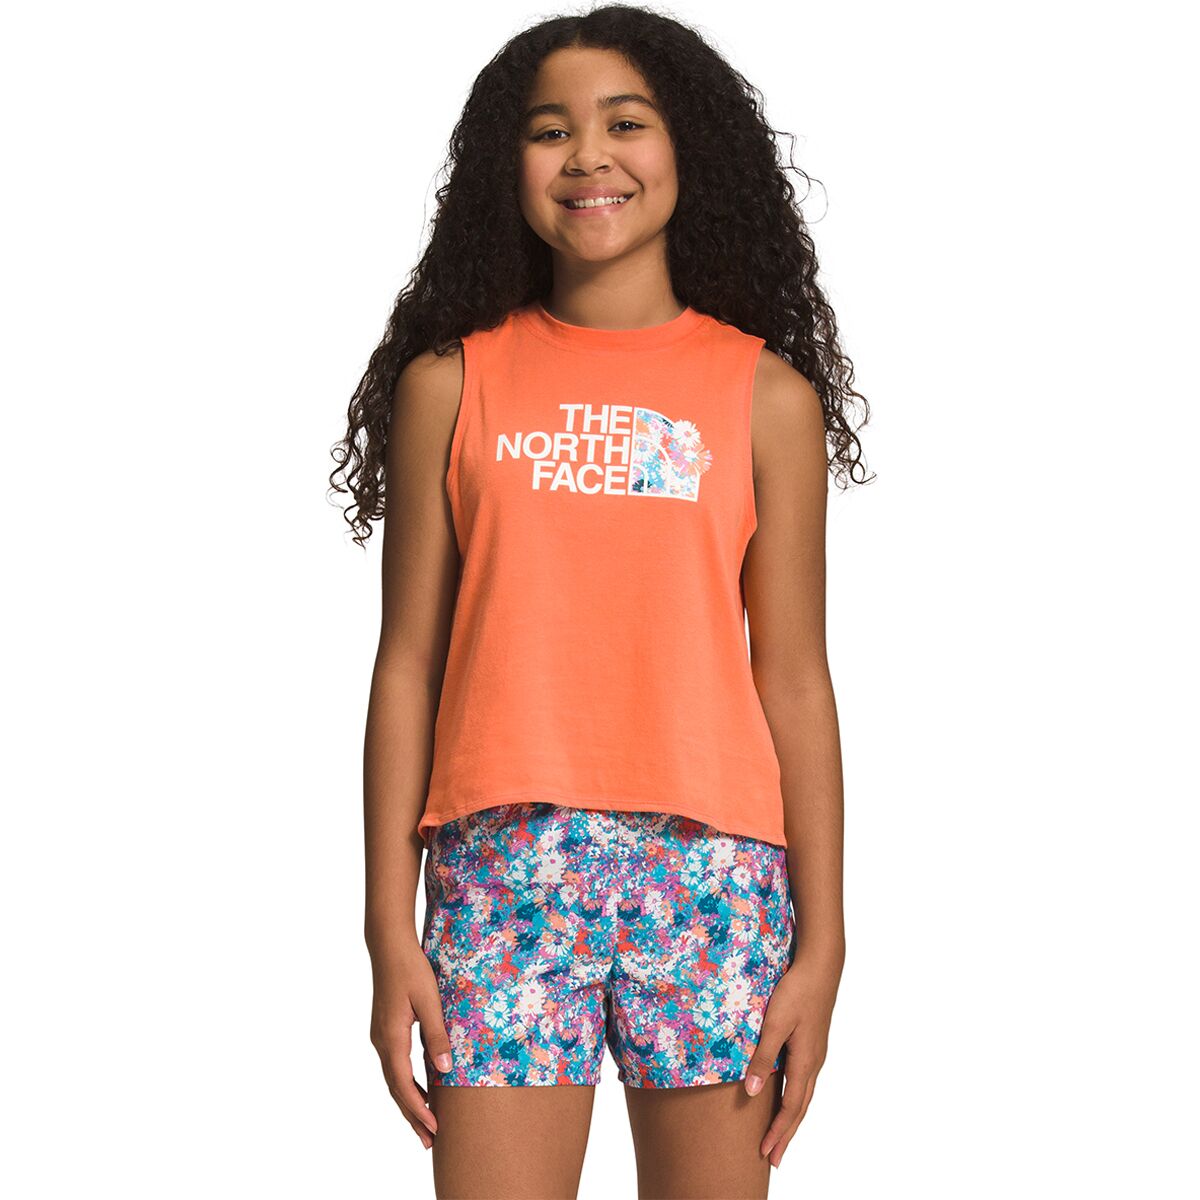 The North Face Tie-Back Tank Top - Girls'